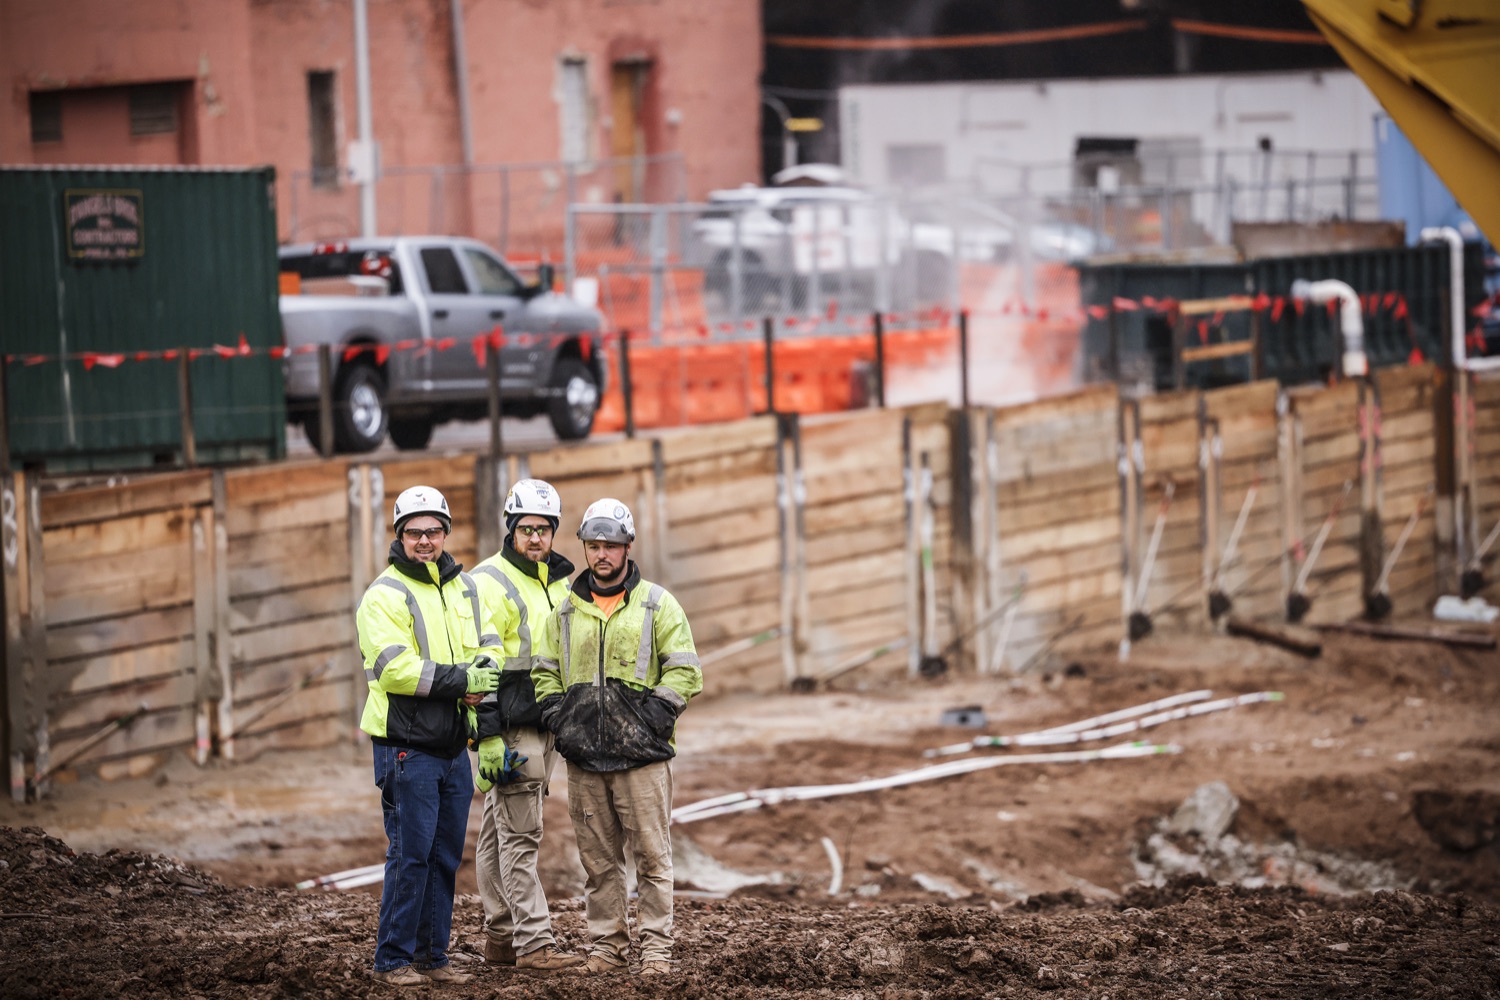 Workers at the construction site.  Pennsylvania Governor Josh Shapiro participates in a groundbreaking for Spark Therapeutics at the future site of their new building, at 30th and Chestnut streets.  FEBRUARY 28, 2023 - PHILADELPHIA, PA<br><a href="https://filesource.amperwave.net/commonwealthofpa/photo/22728_gov_spark_dz_0012.JPG" target="_blank">⇣ Download Photo</a>